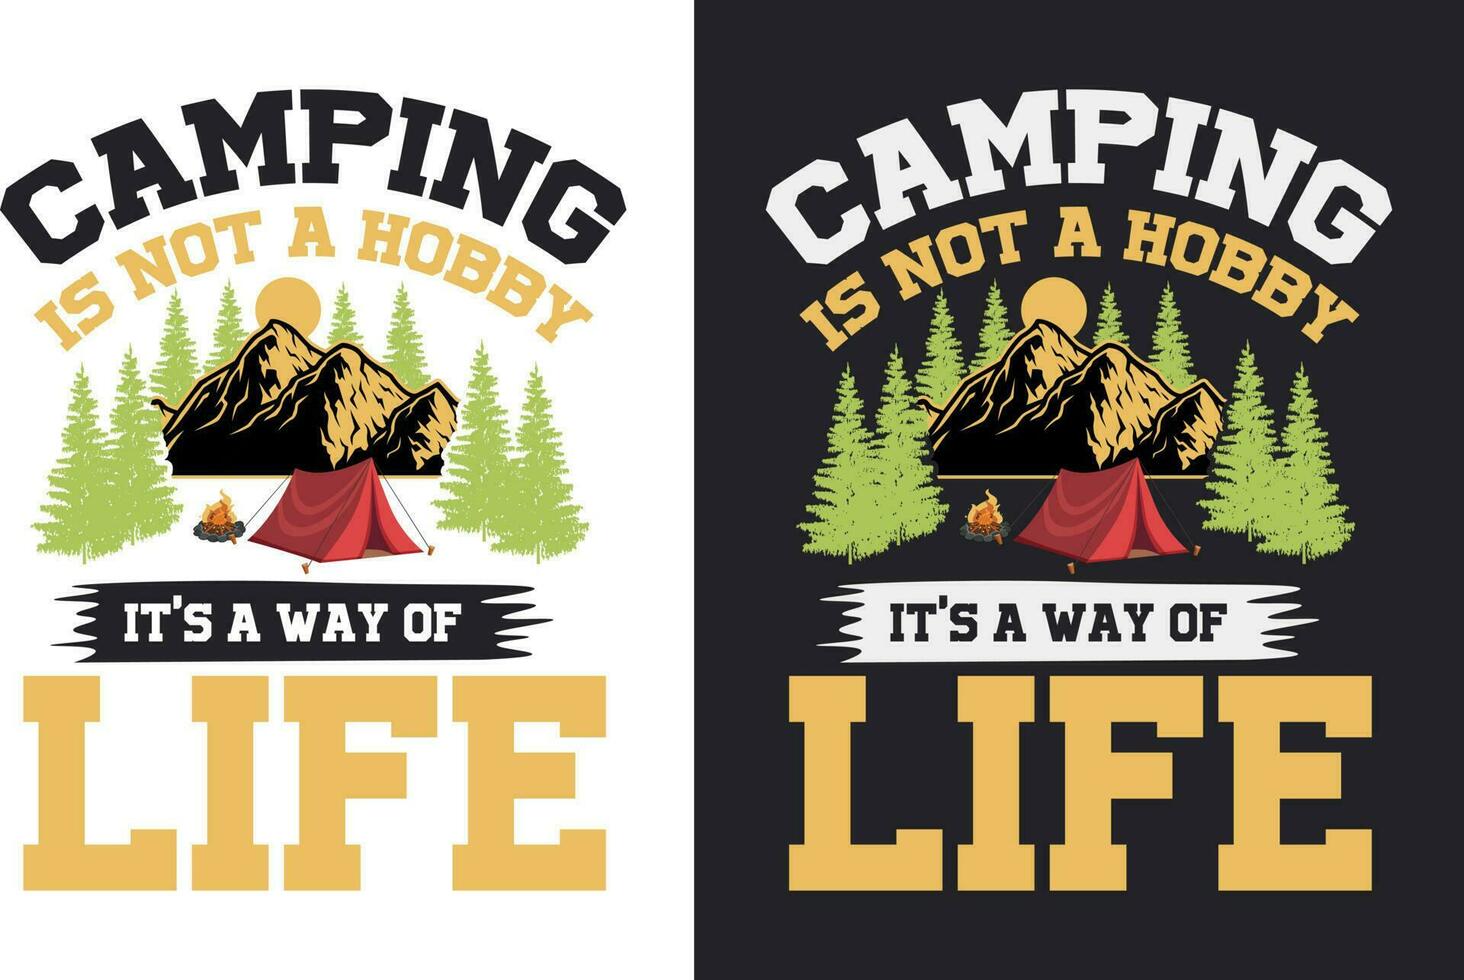 Creative retro vintage camping t shirt design free download, camping eliments free download vector